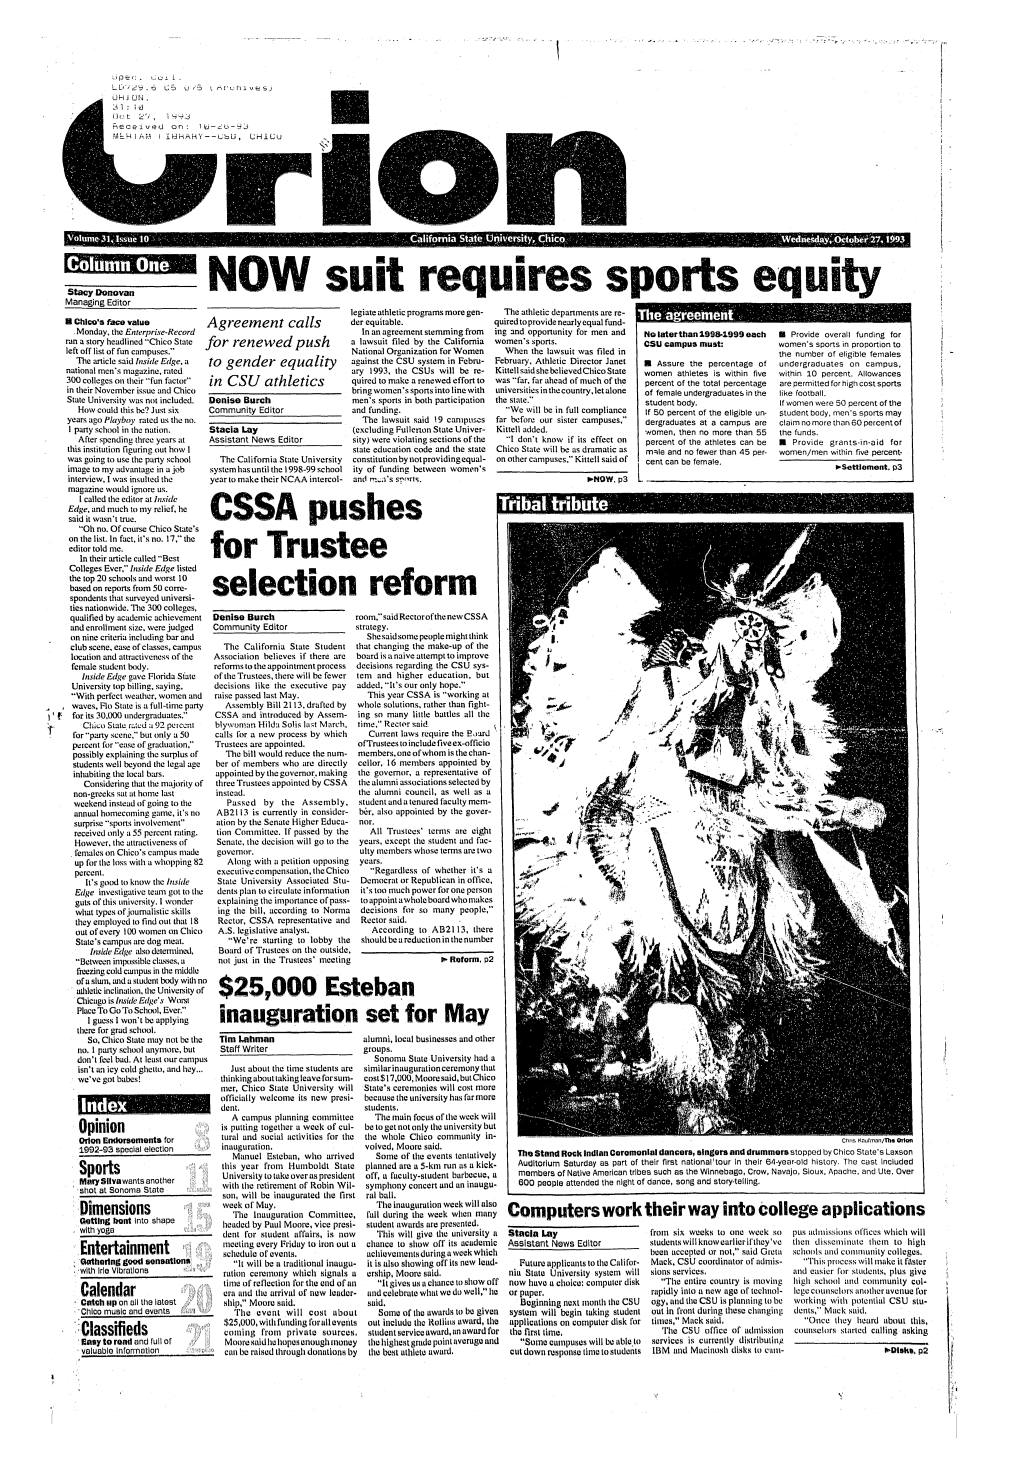 NOW Suit Requires Sports Equity